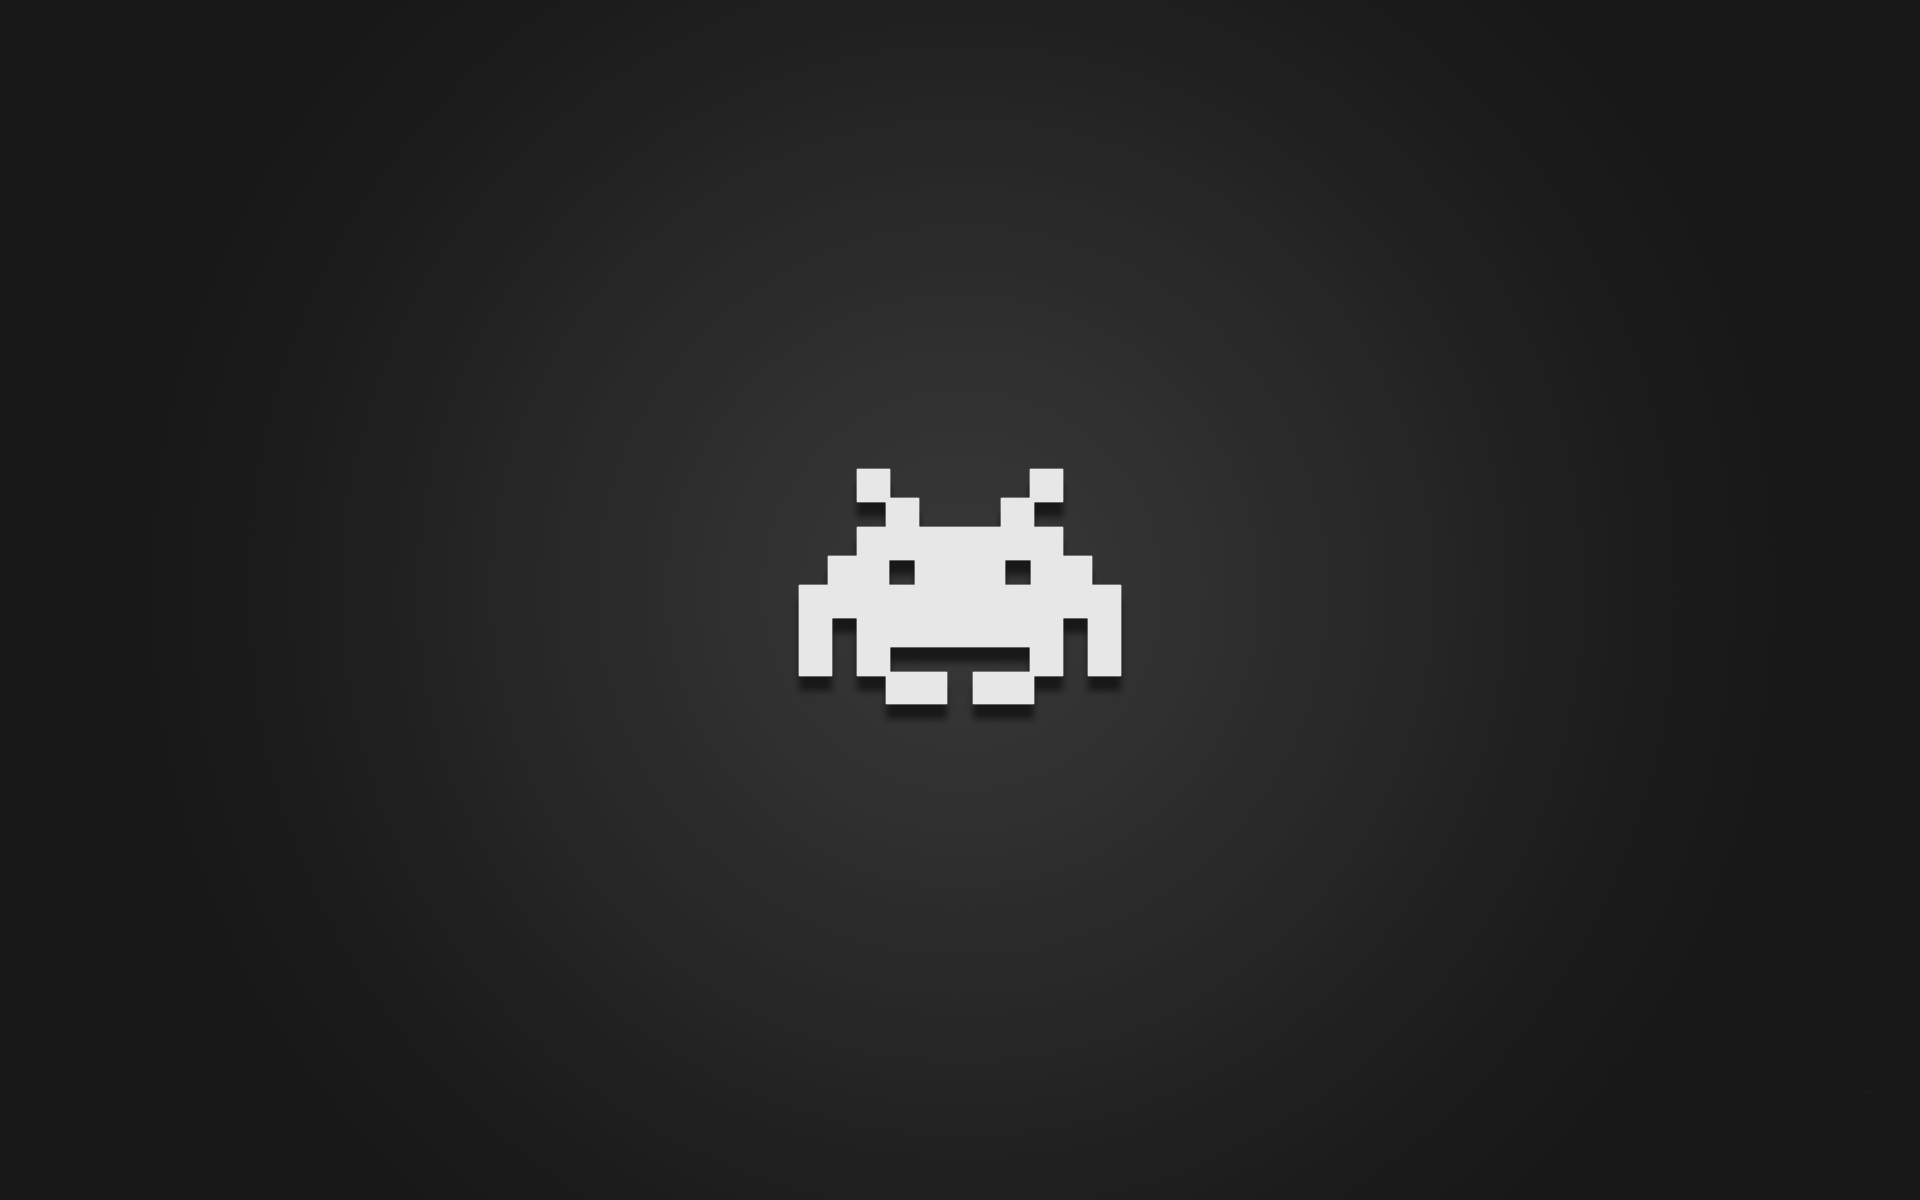 Games Minimalistic Space Invaders Retro Wallpaper Background